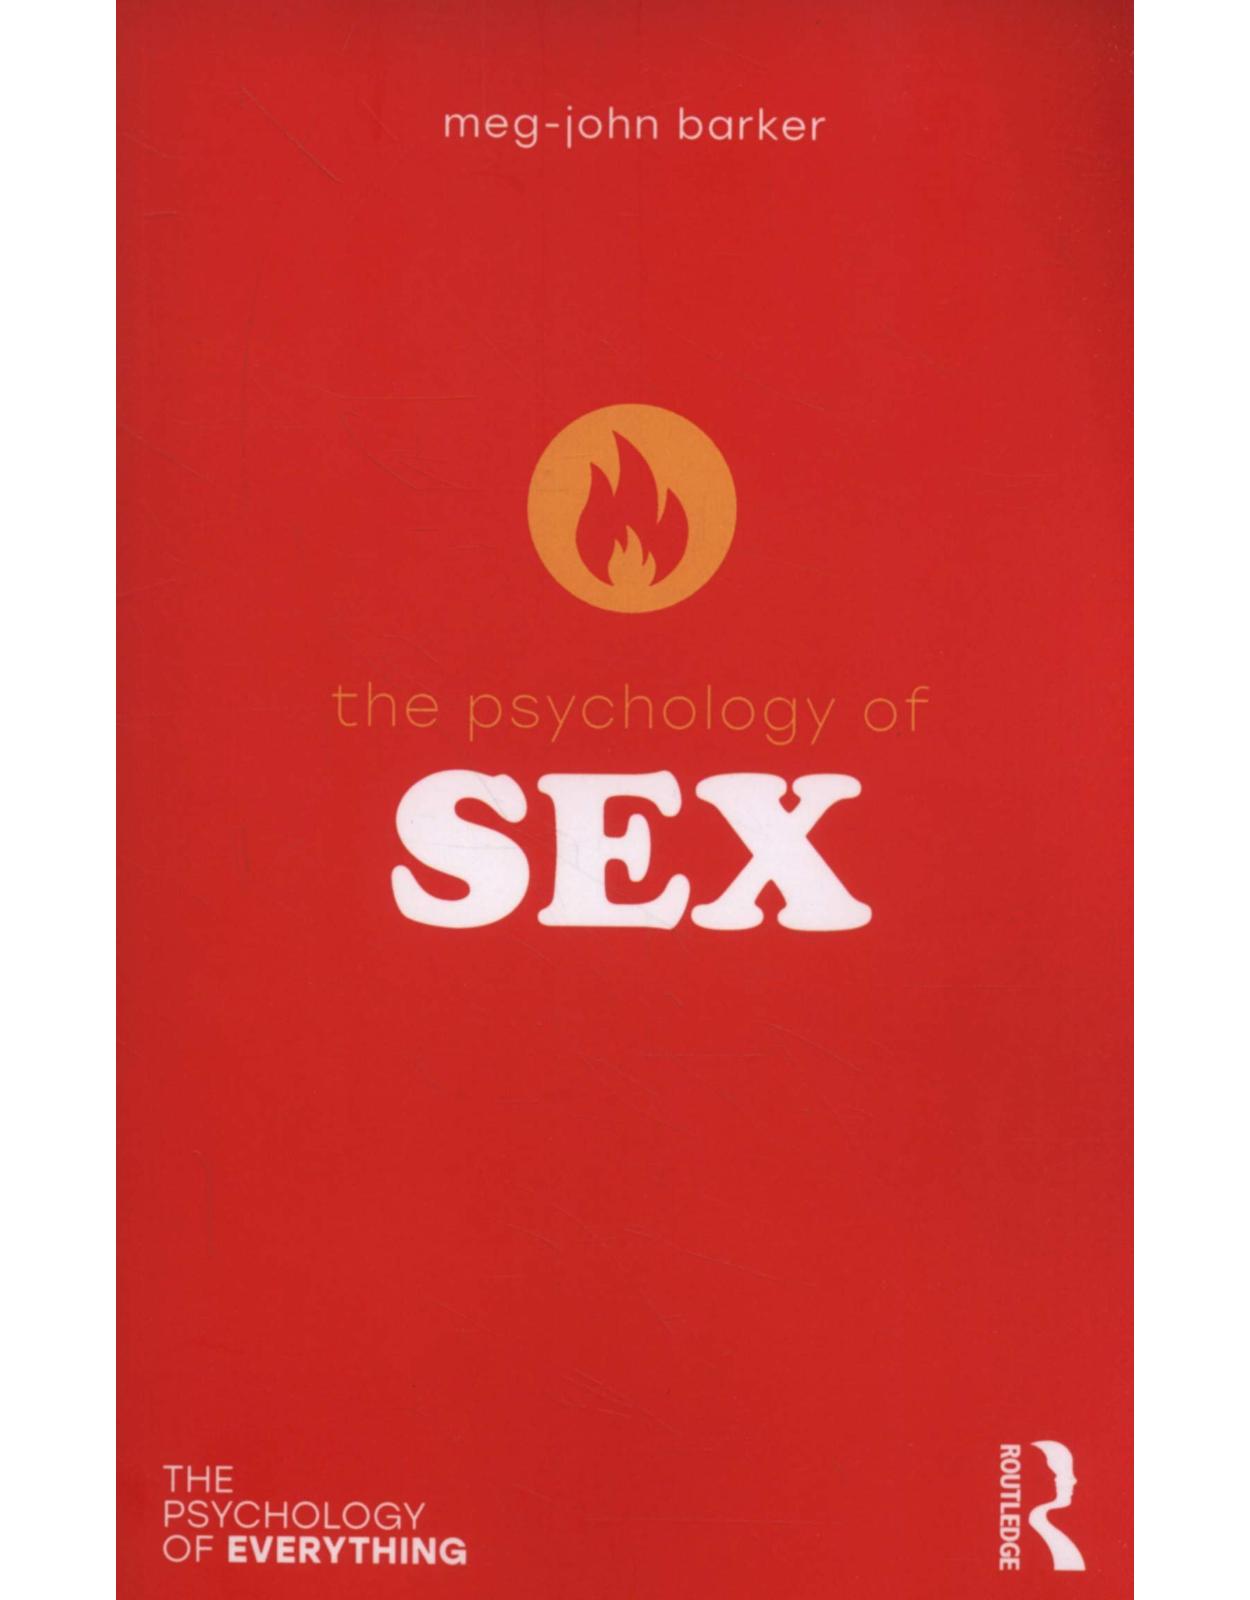 The Psychology of Sex (The Psychology of Everything)